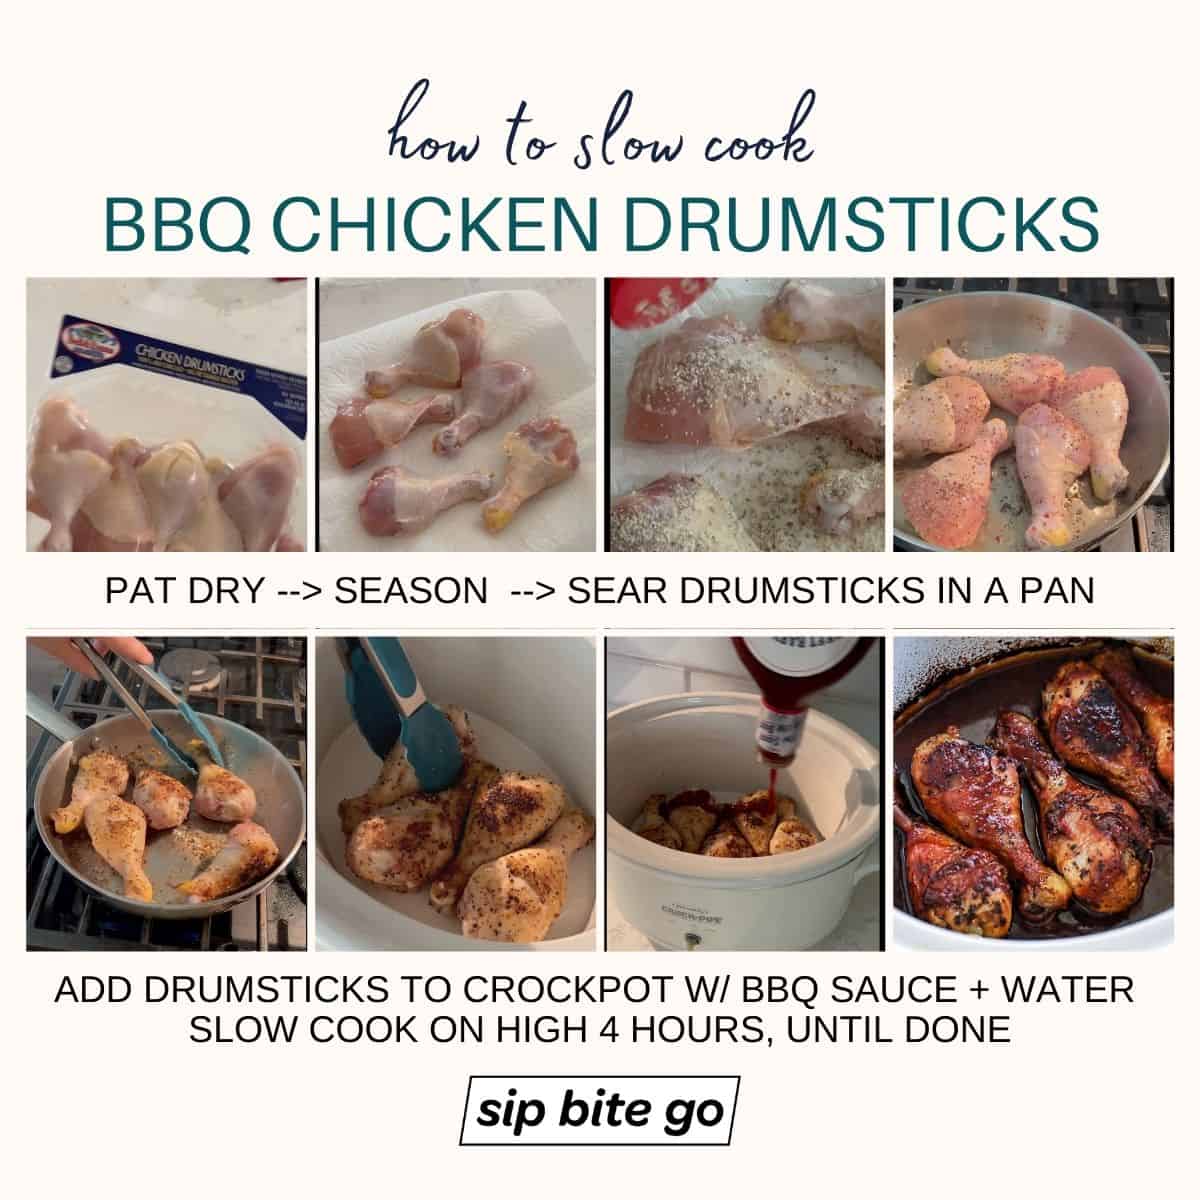 Infographic demonstrating how to slow cook bbq chicken drumsticks